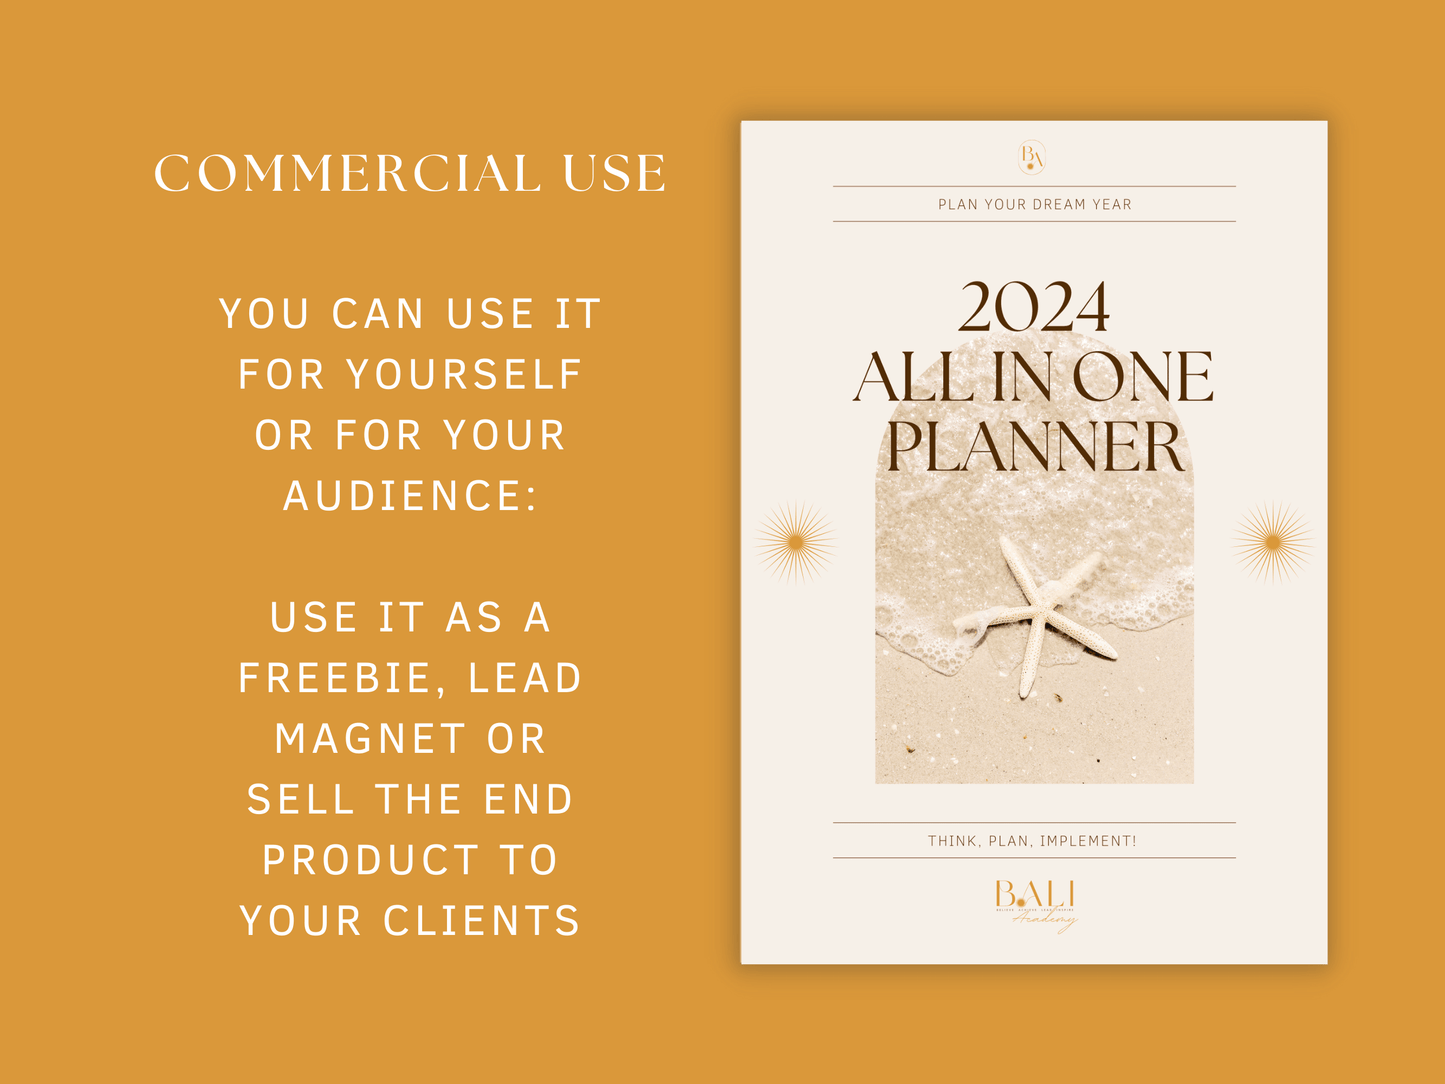 2024 All in One boho and aesthetic done-for-you planner cover template for commercial use for content creators and business owners. You can use it for yourself or for your audience. Use it as a freebie, lead magnet or sell the end product to your clients.